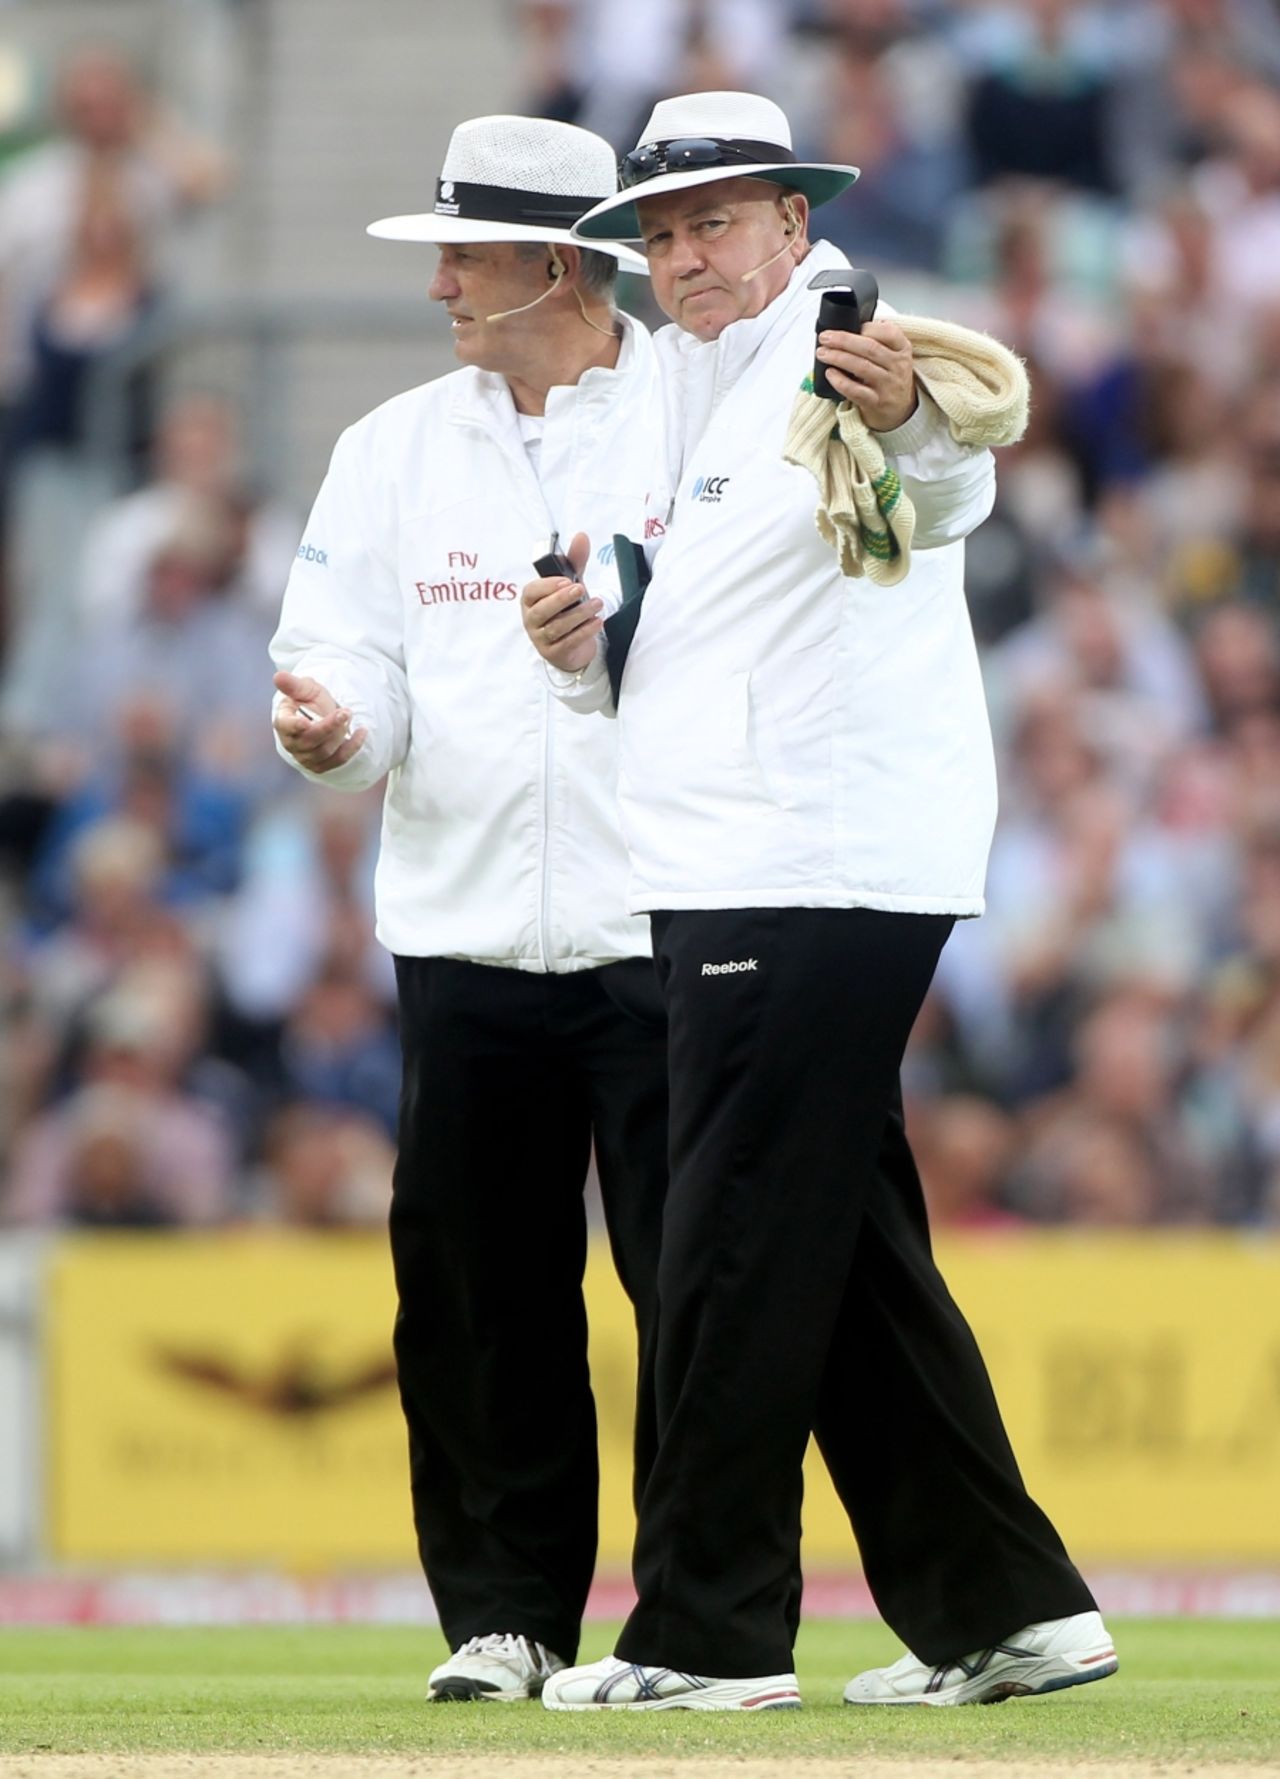 Umpires Steve Davis and Tony Hill check the light before sending the players off, England v Pakistan, 3rd Test, The Oval, August 20, 2010